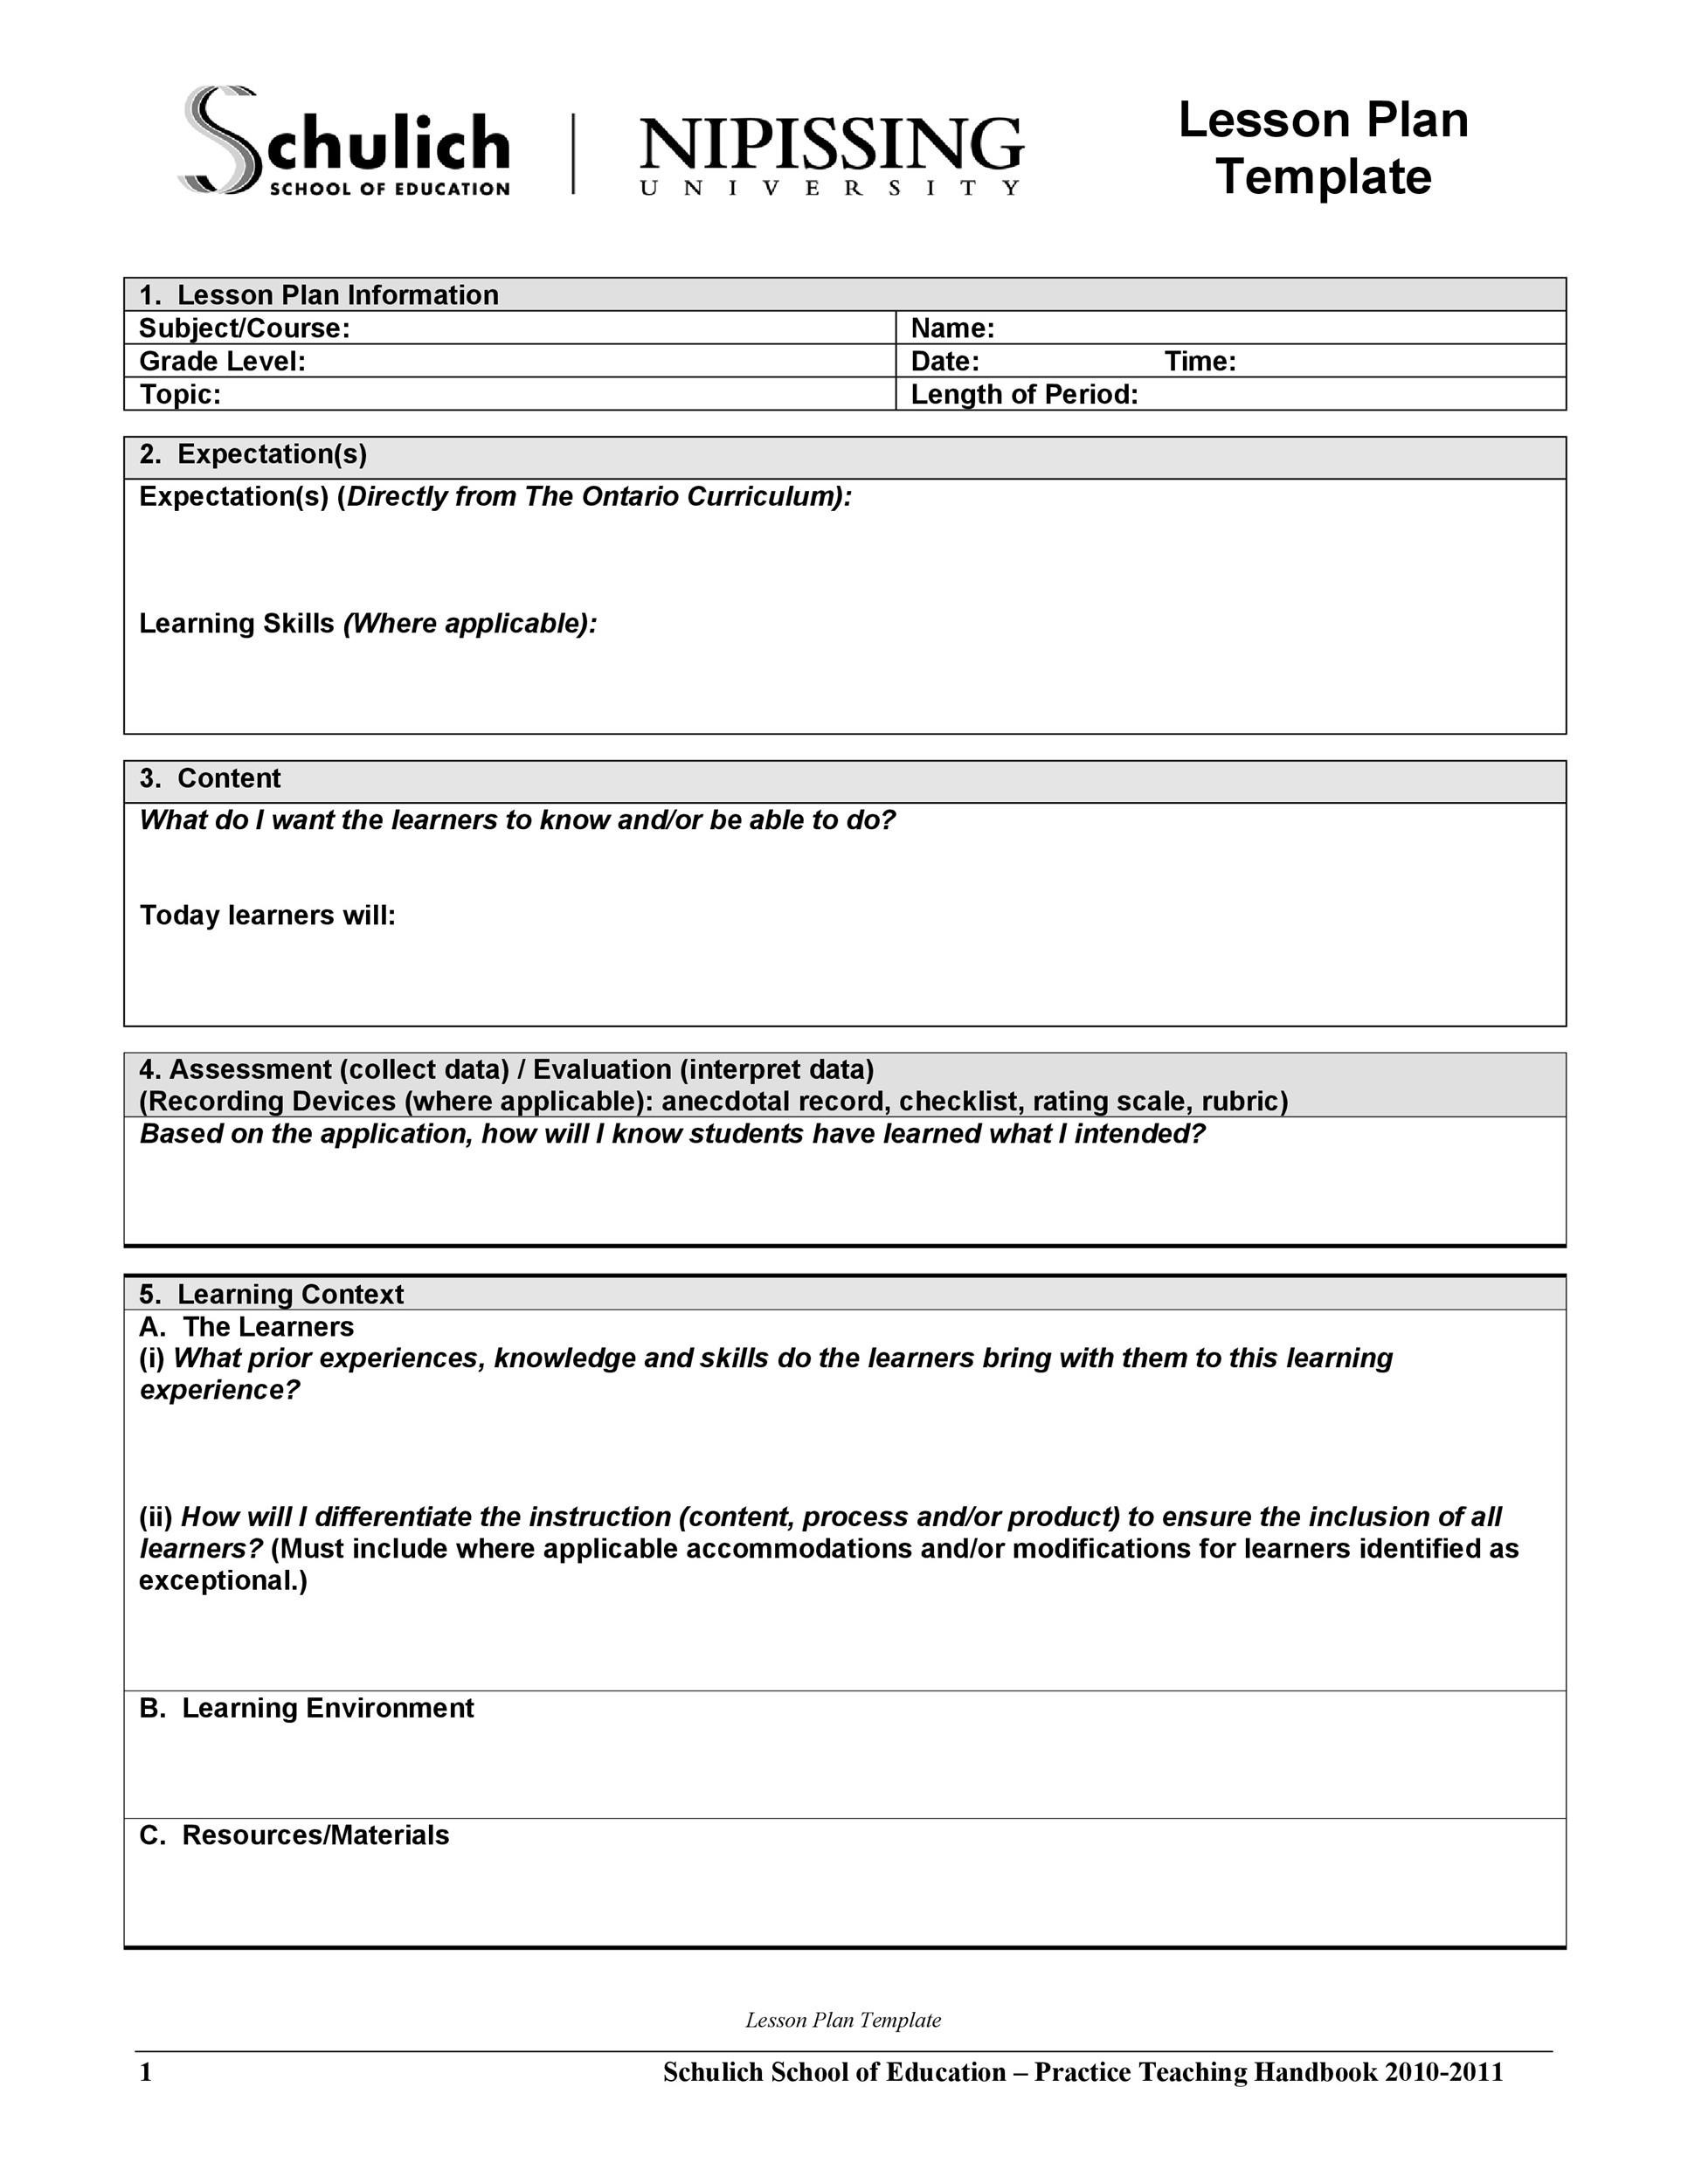 Free lesson plan template 38